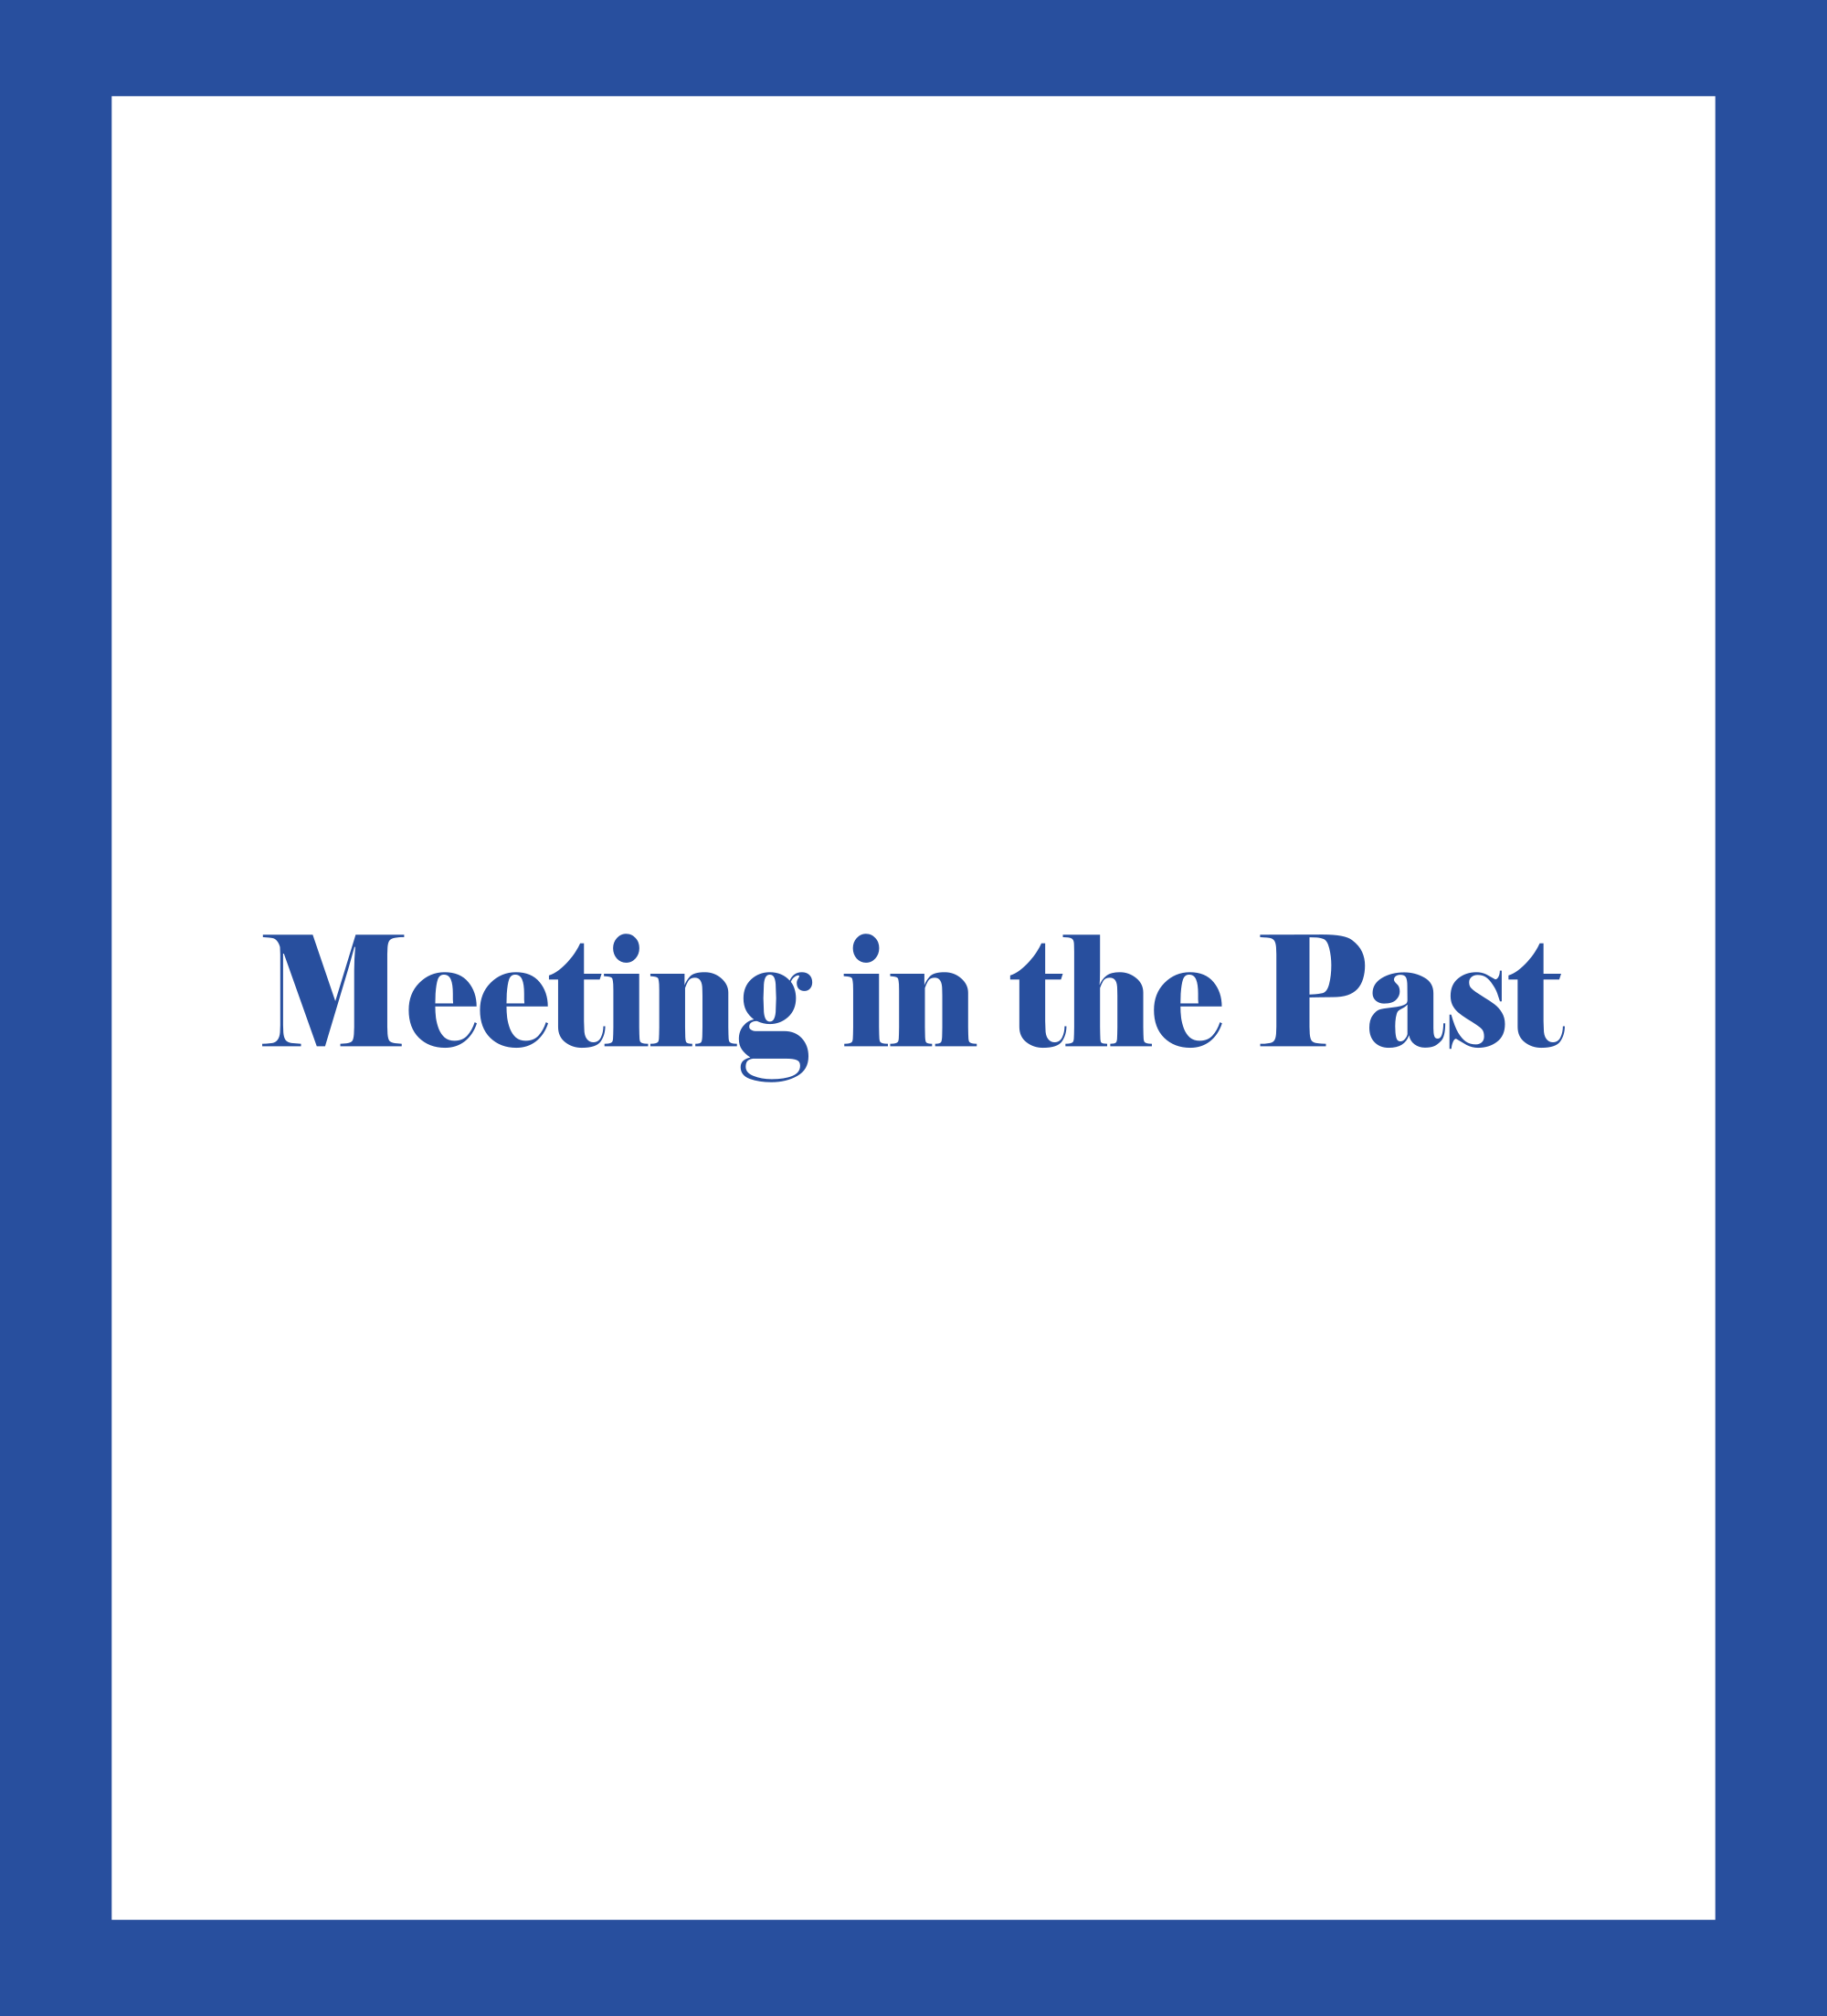 Meeting in the Past